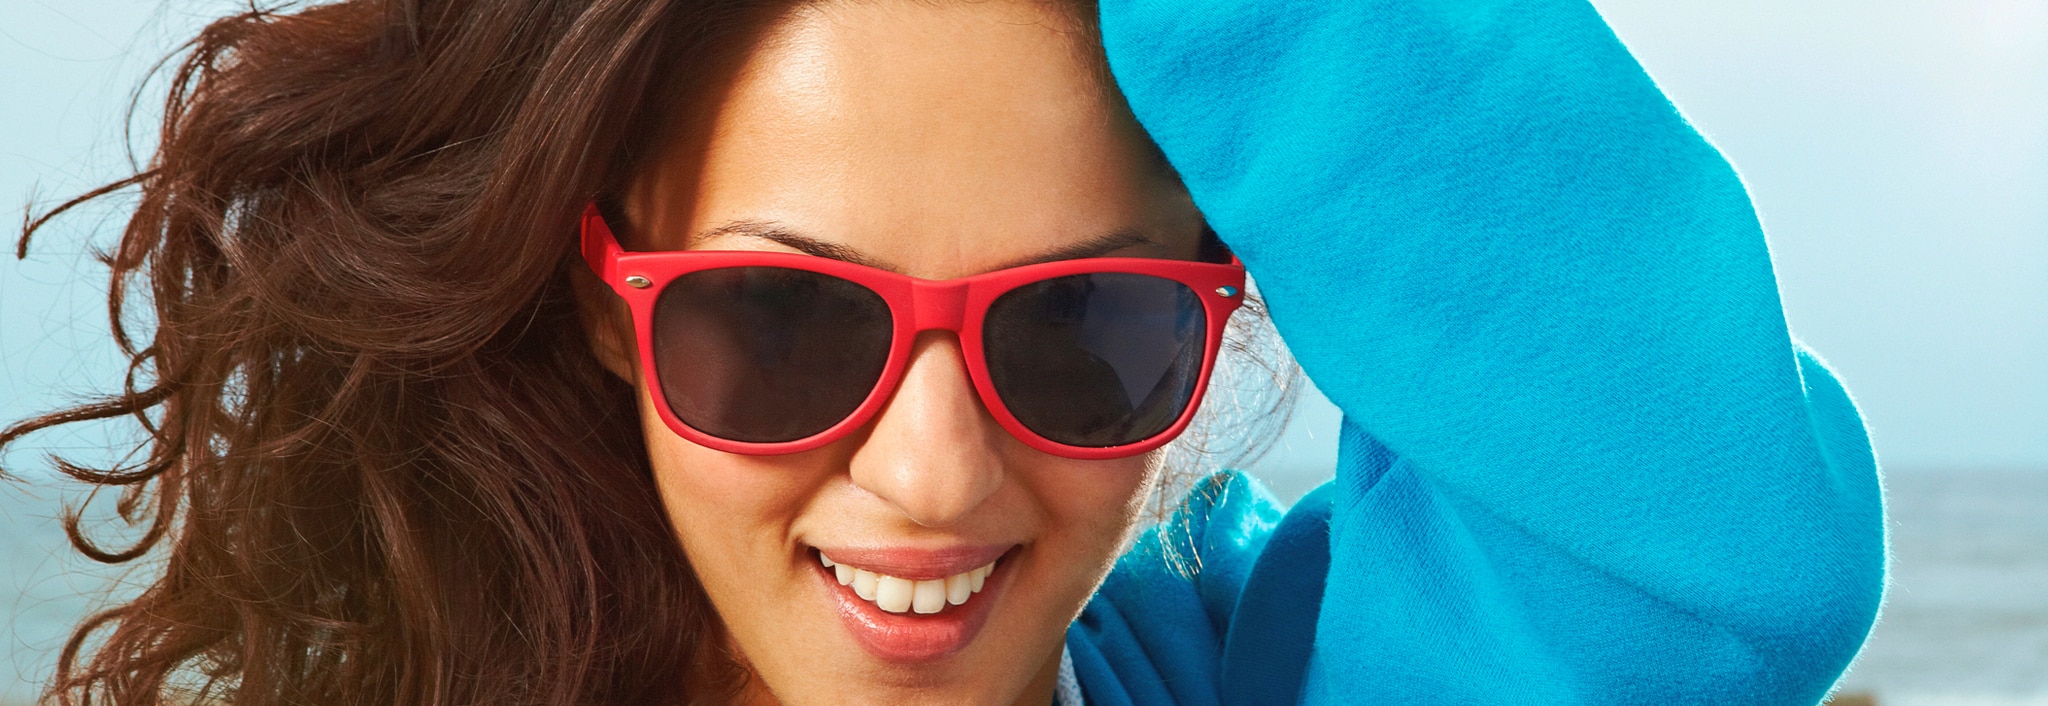 A smiling woman wearing red sunglasses, running a hand through her thick, wavy, brown hair. 